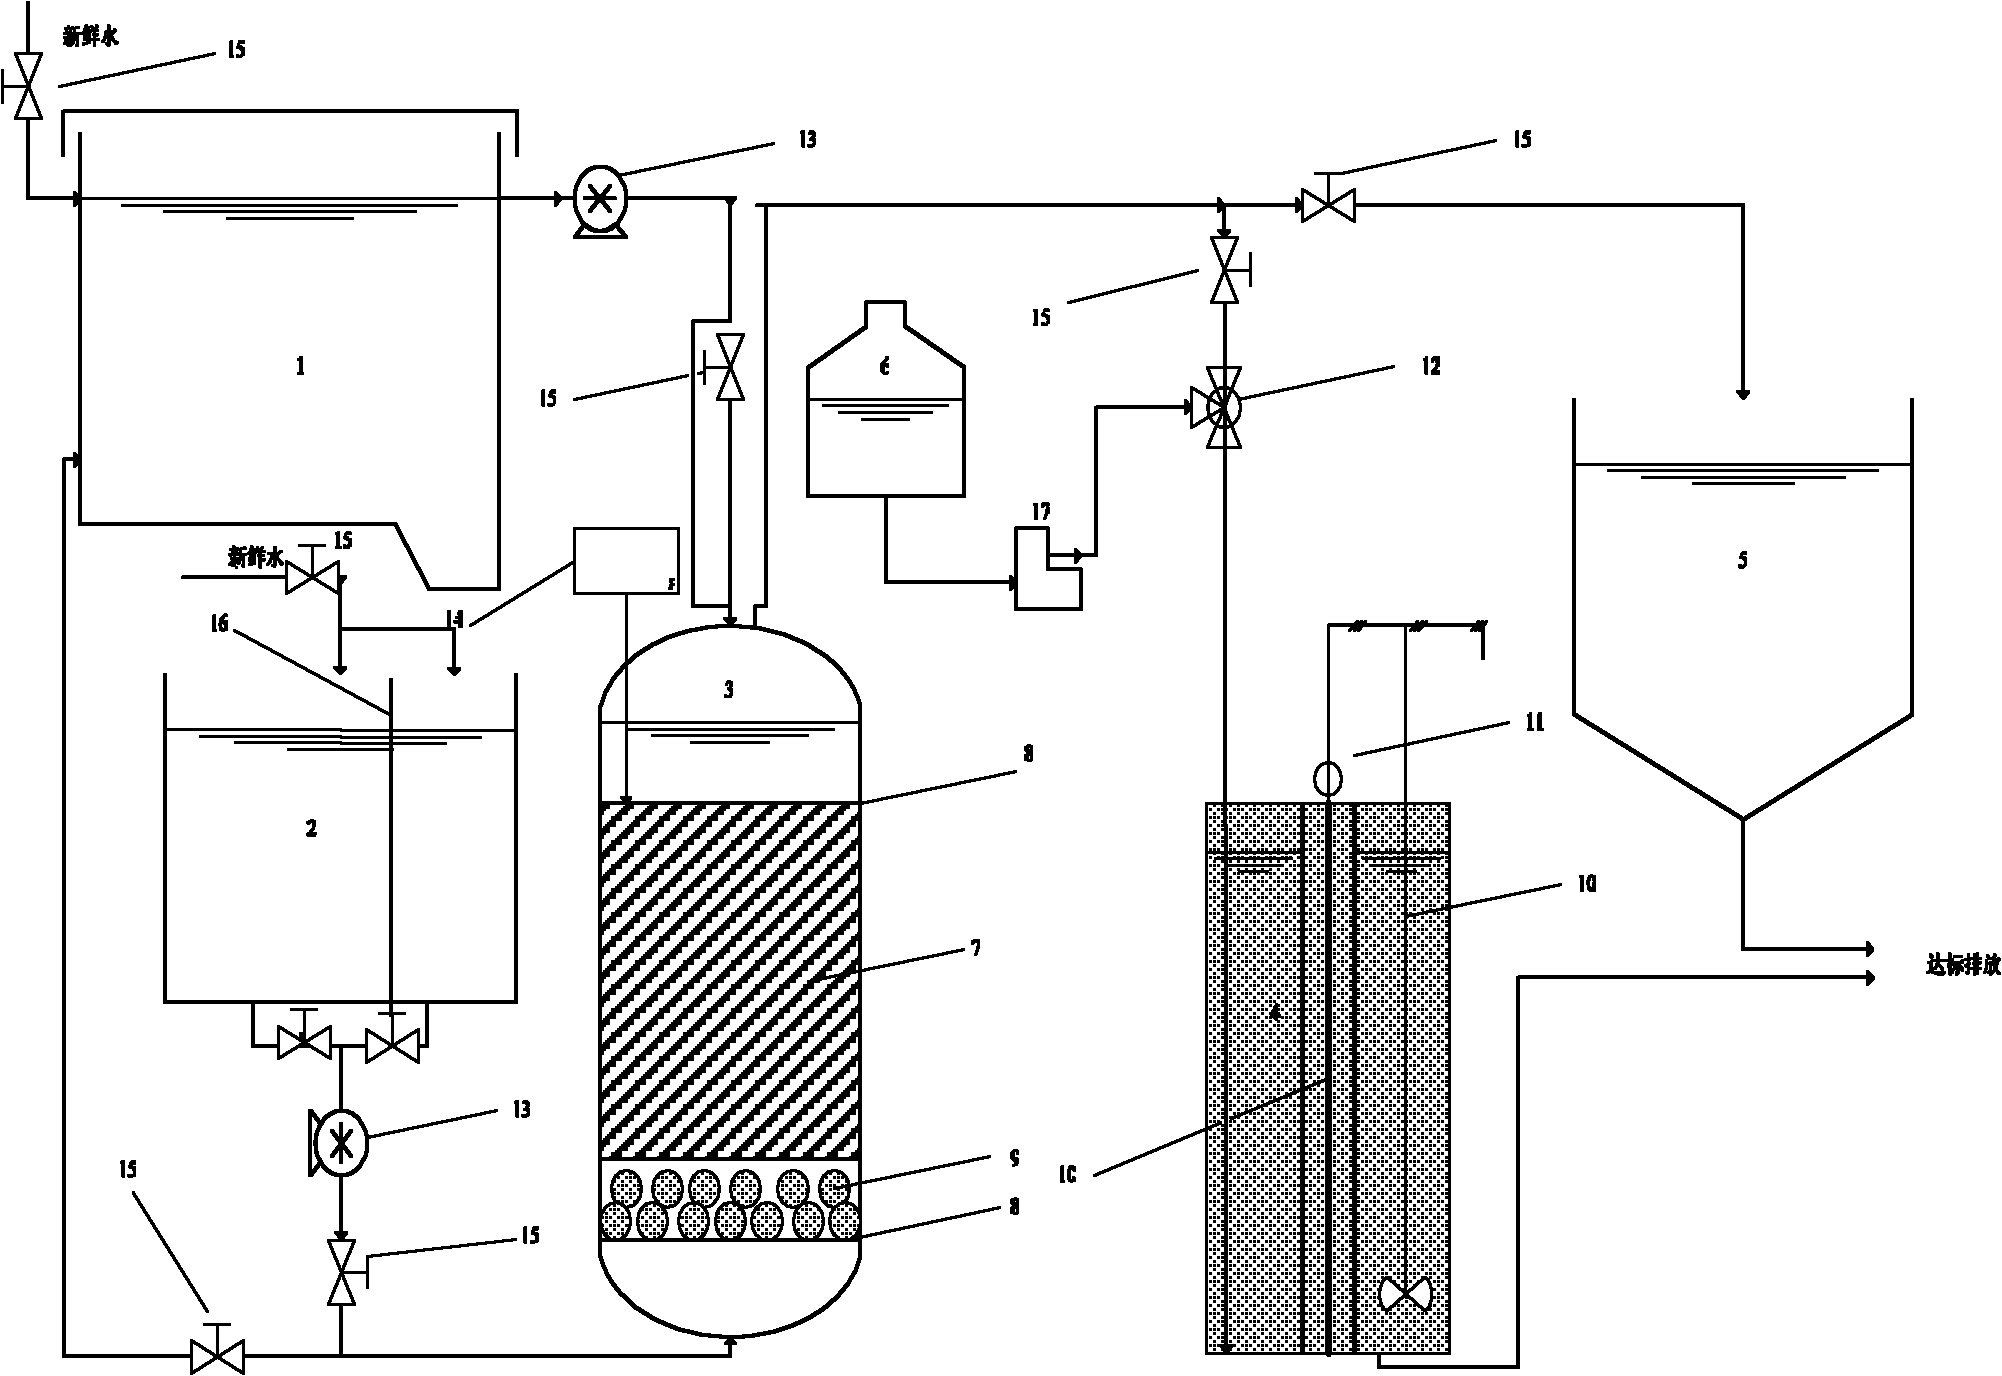 A method and device for treating and reusing waste water from on-line printing, dyeing and washing